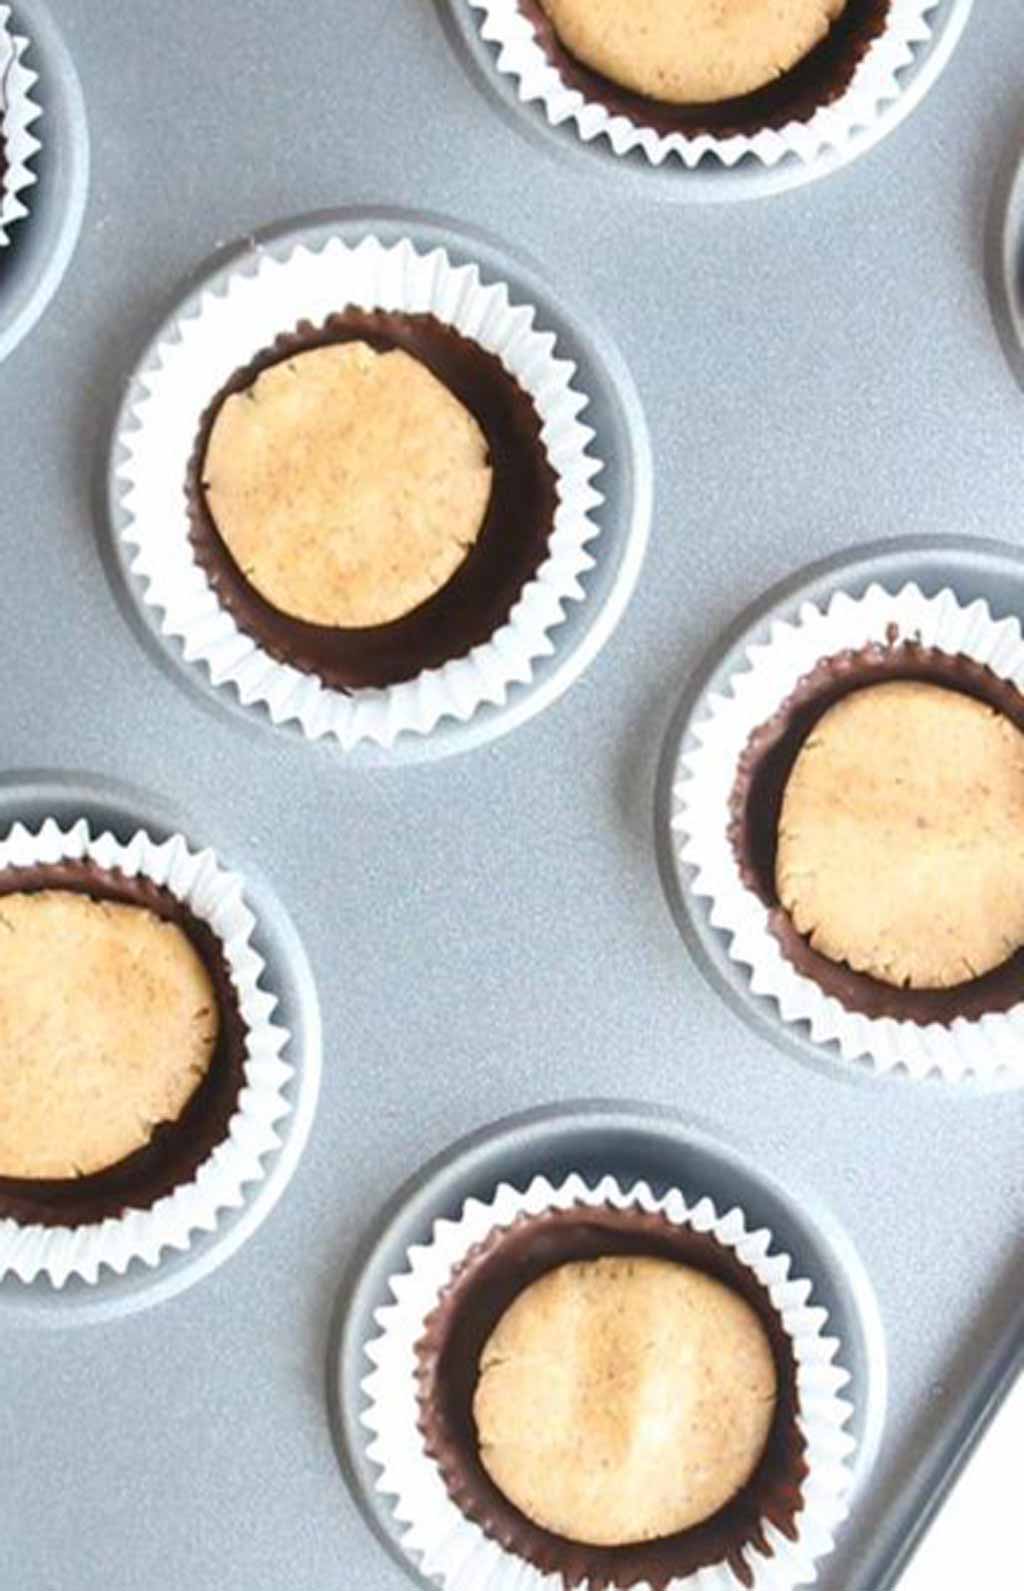 Chocolate Cups Filled With Peanut Butter Filling